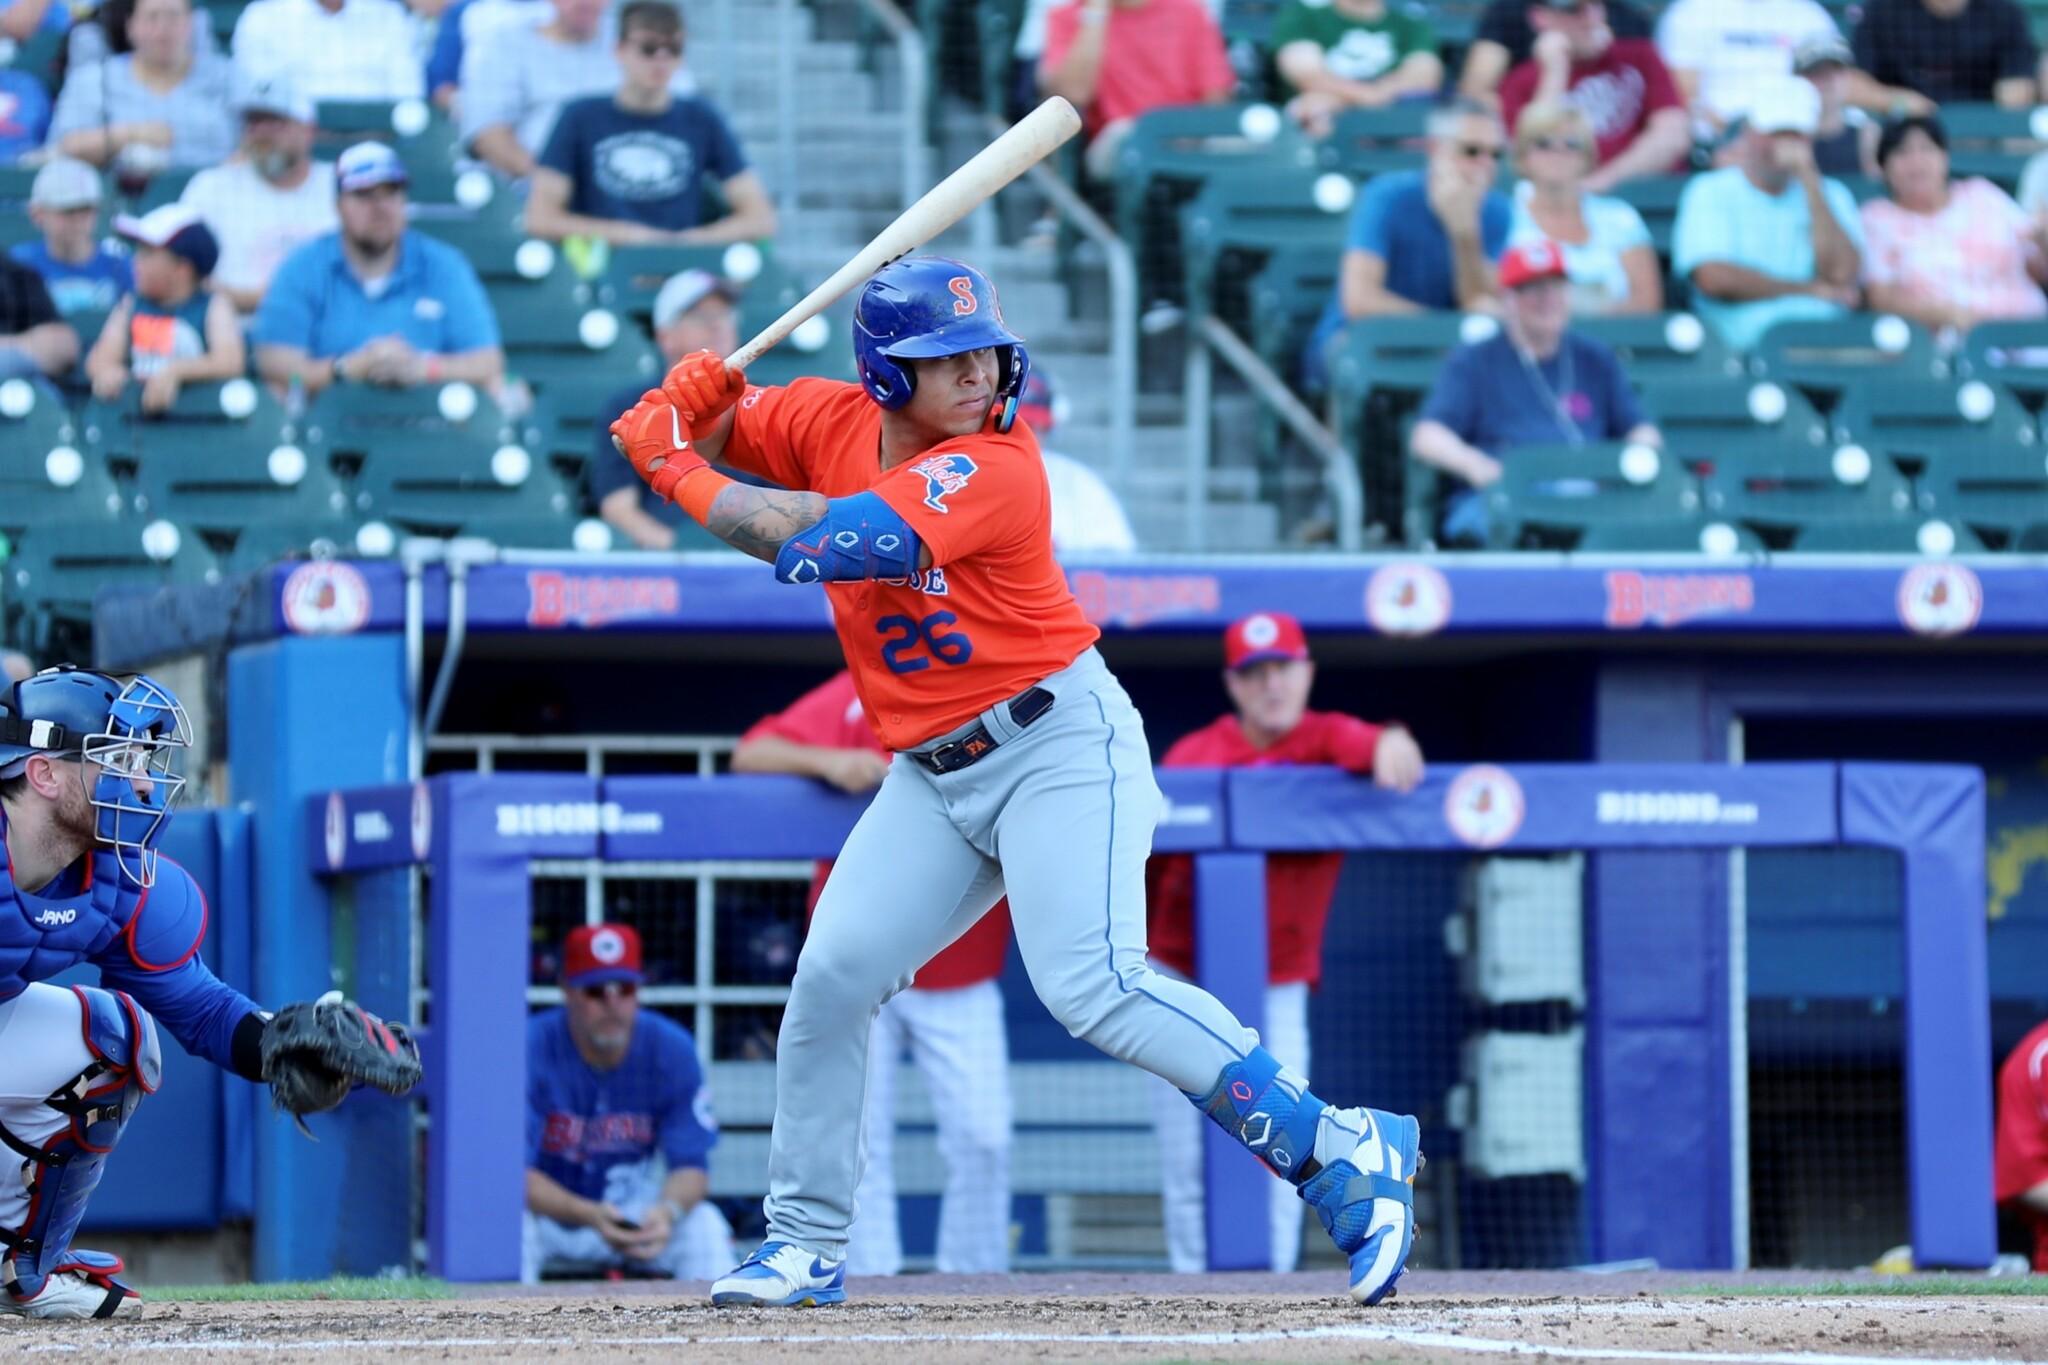 Francisco Alvarez at the plate on the road in Buffalo with Syracuse Mets. / Lauren Haak/Buffalo Bisons